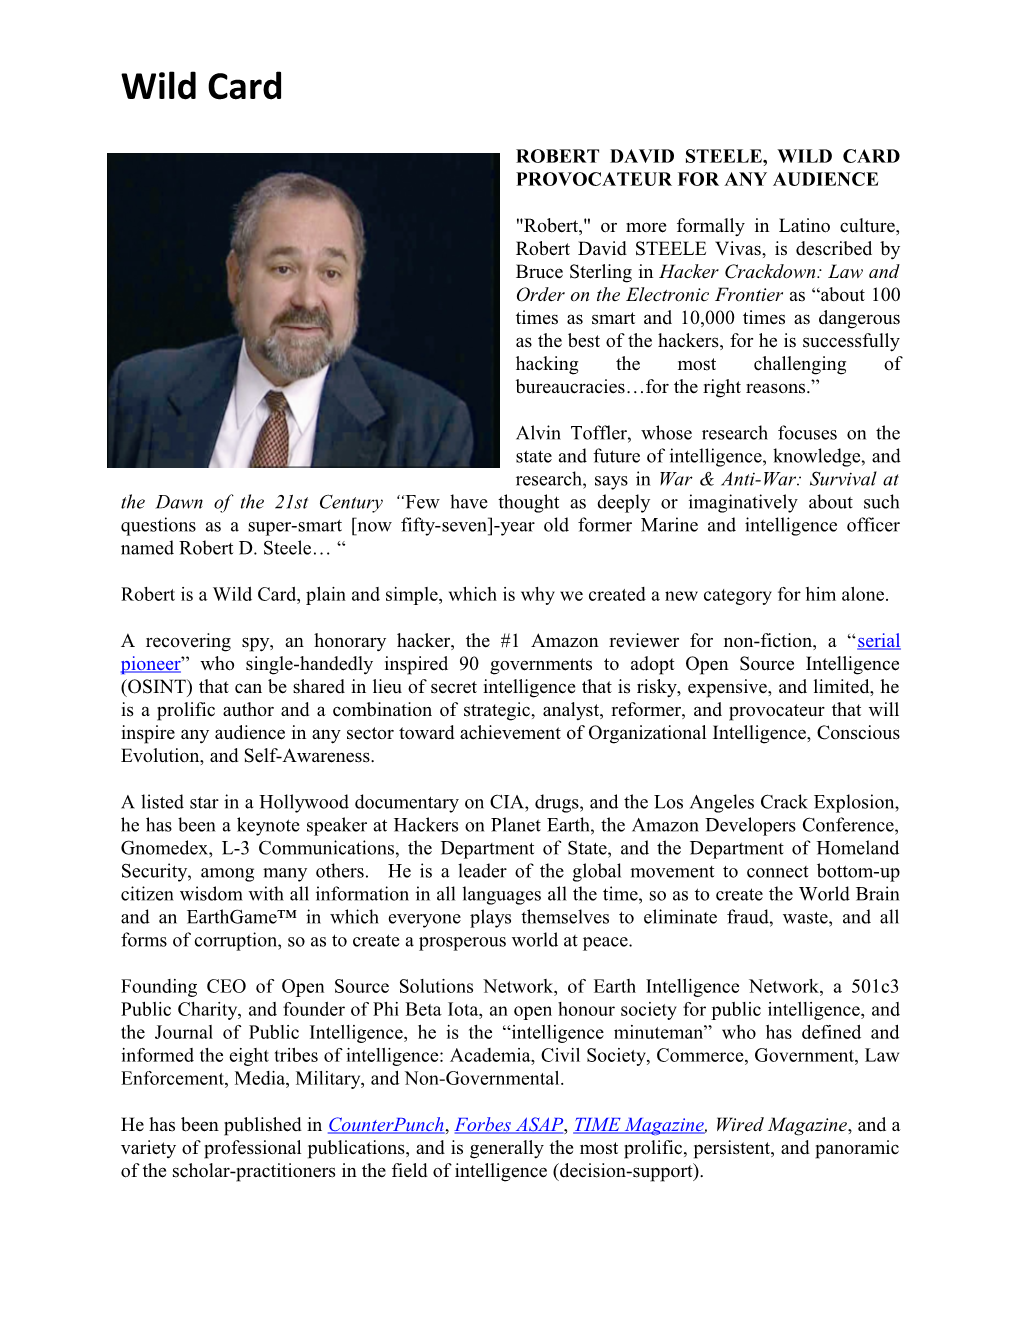 Robert David Steele, Wild Card Provocateur for Any Audience